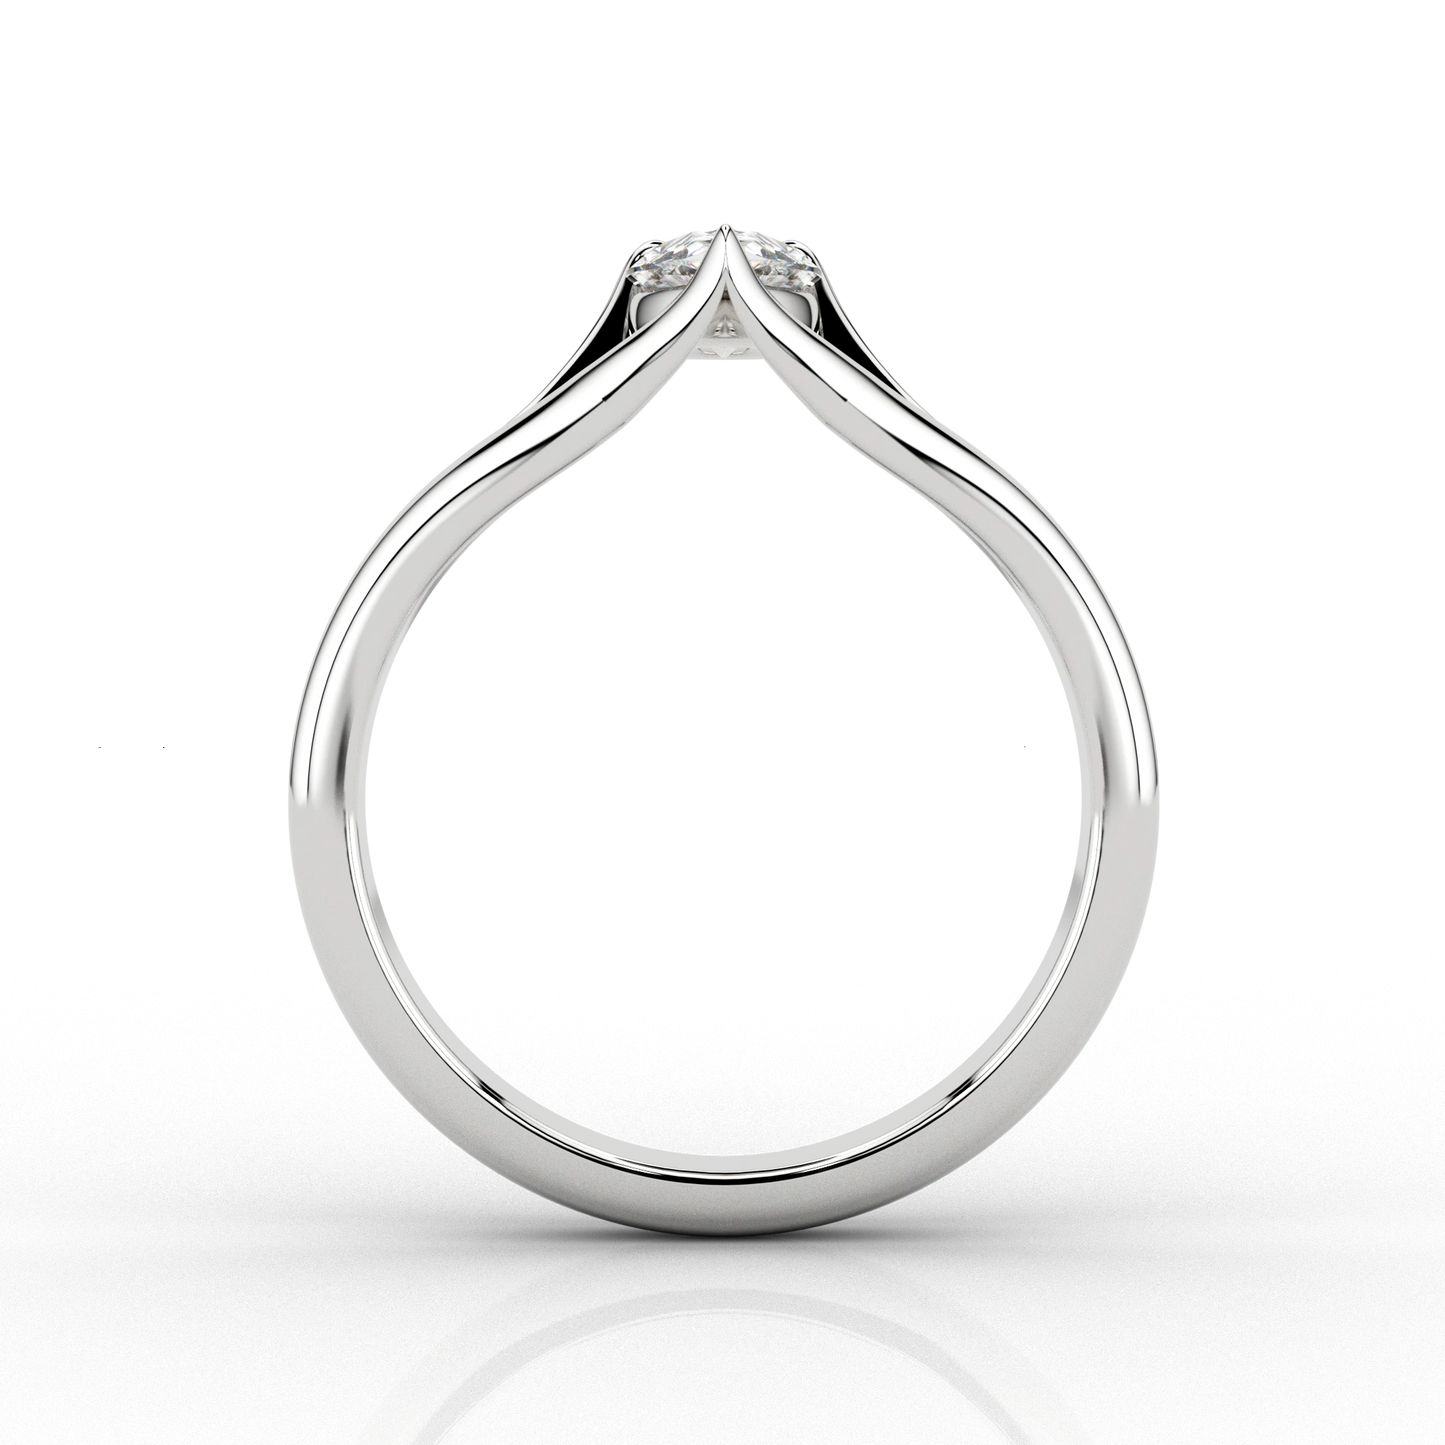 Suspended Pear Cut 0.5ct Diamond Ring in Recycled Platinum